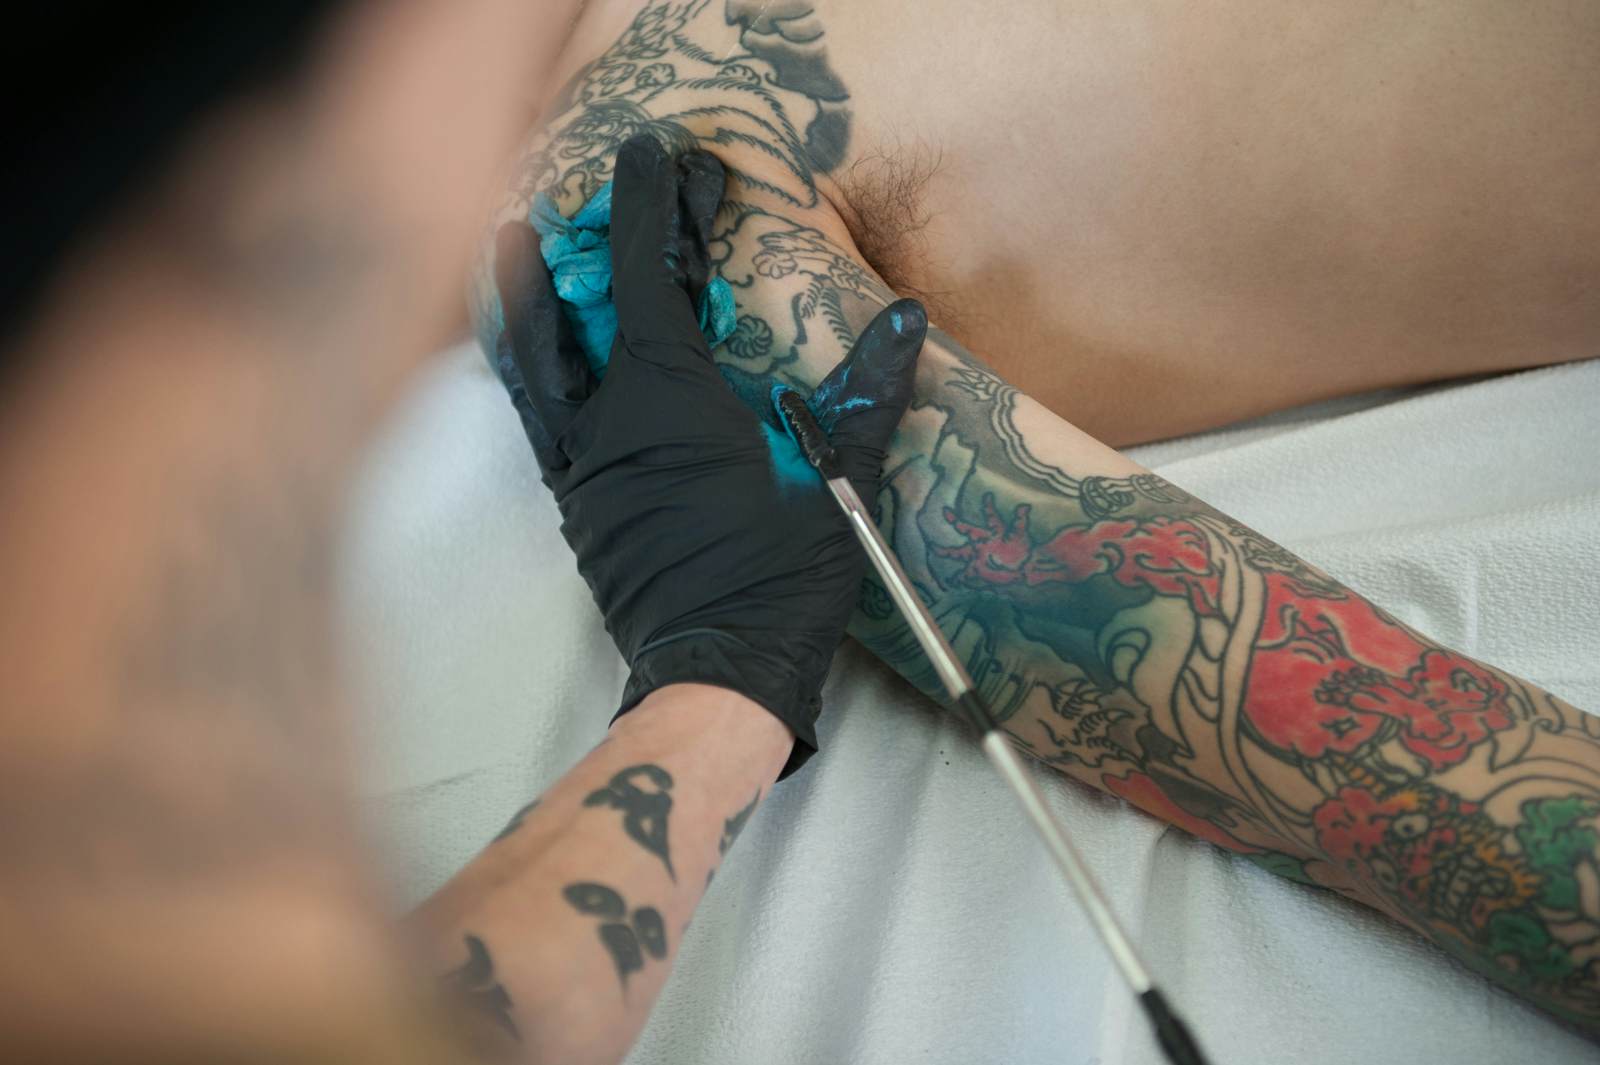 Tattoo inks banned across Europe because of cancer fears - Hull Live